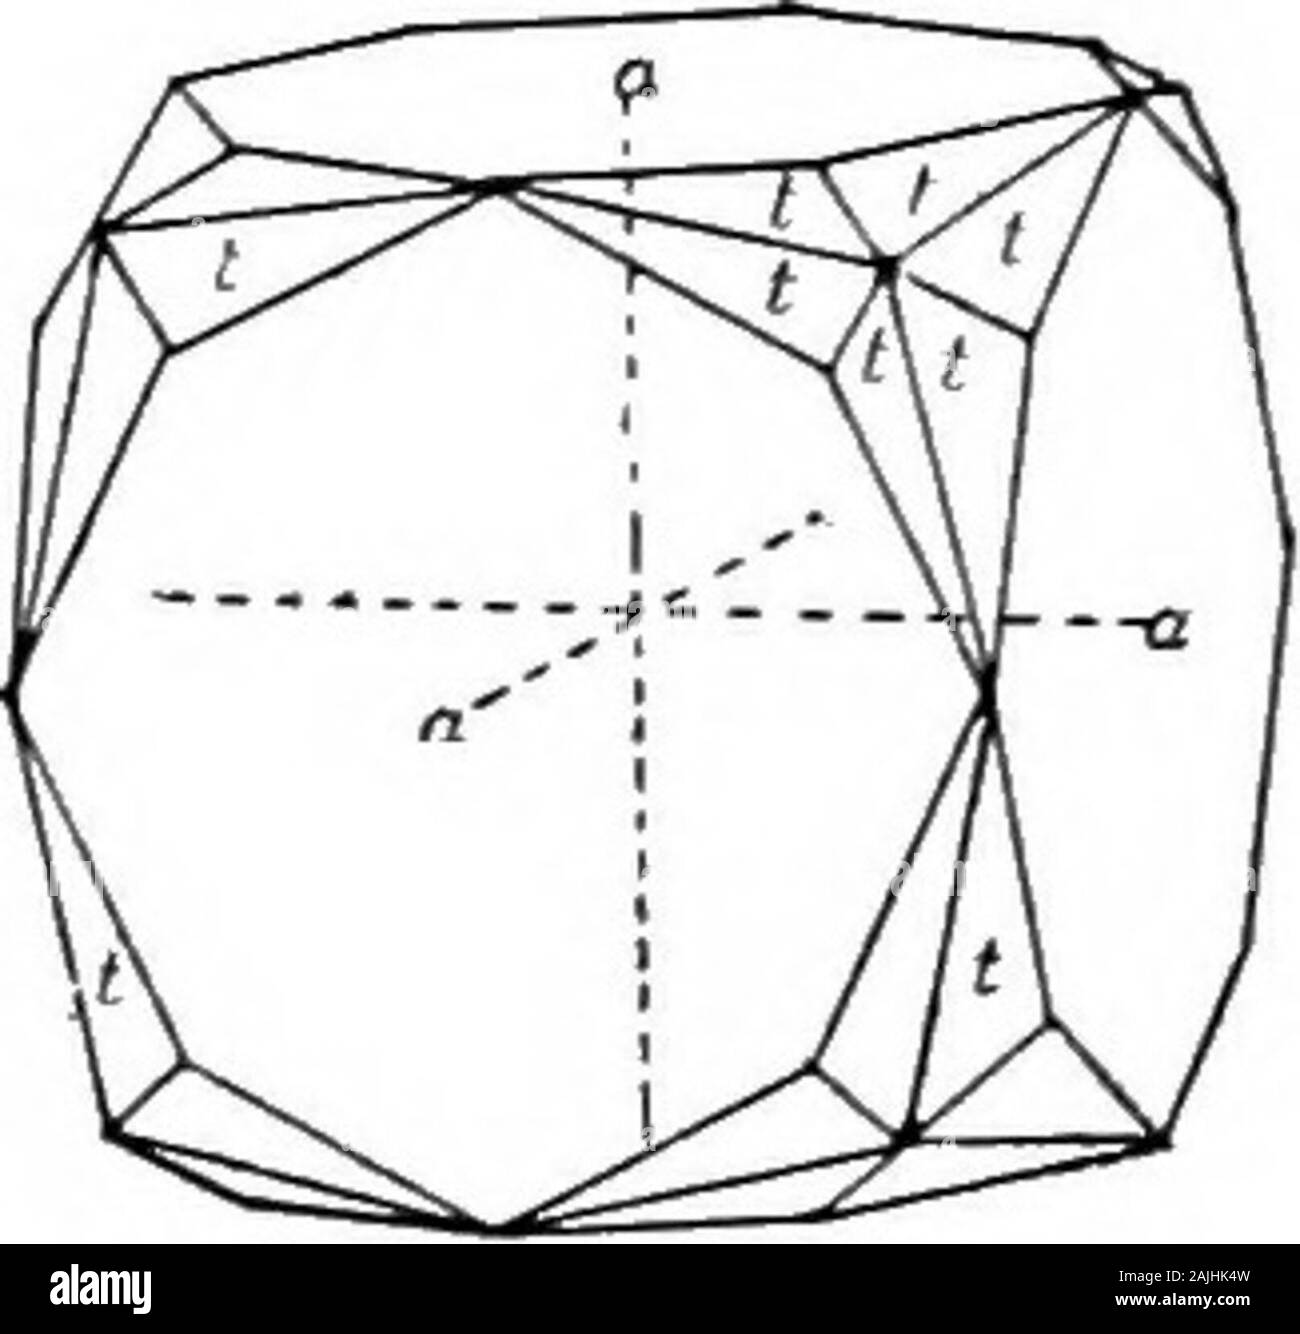 Elements of mineralogy, crystallography and blowpipe analysis from a practical standpoint .. . o V Fig. 509. Northumberland. Fig. 510.. Crystallization.—Isometric. Usually cubes with modifyingforms, especially the tetrahexahedron c = a : 2a : ca a, the dodeca-hedron d and the hexoctahedron t ^ a: 2a: 4^. The cube facesare often striated parallel to the edges, giving the appearance of avery flat tetrahexahedron. Rarely found in octahedrons, some-  Engineering and Mining Jorunal^ 190O) P- 2. CALCIUM AND MAGNESIUM MINERALS. 305 times formed by the grouping of small cubes in parallel positions.Pe Stock Photo